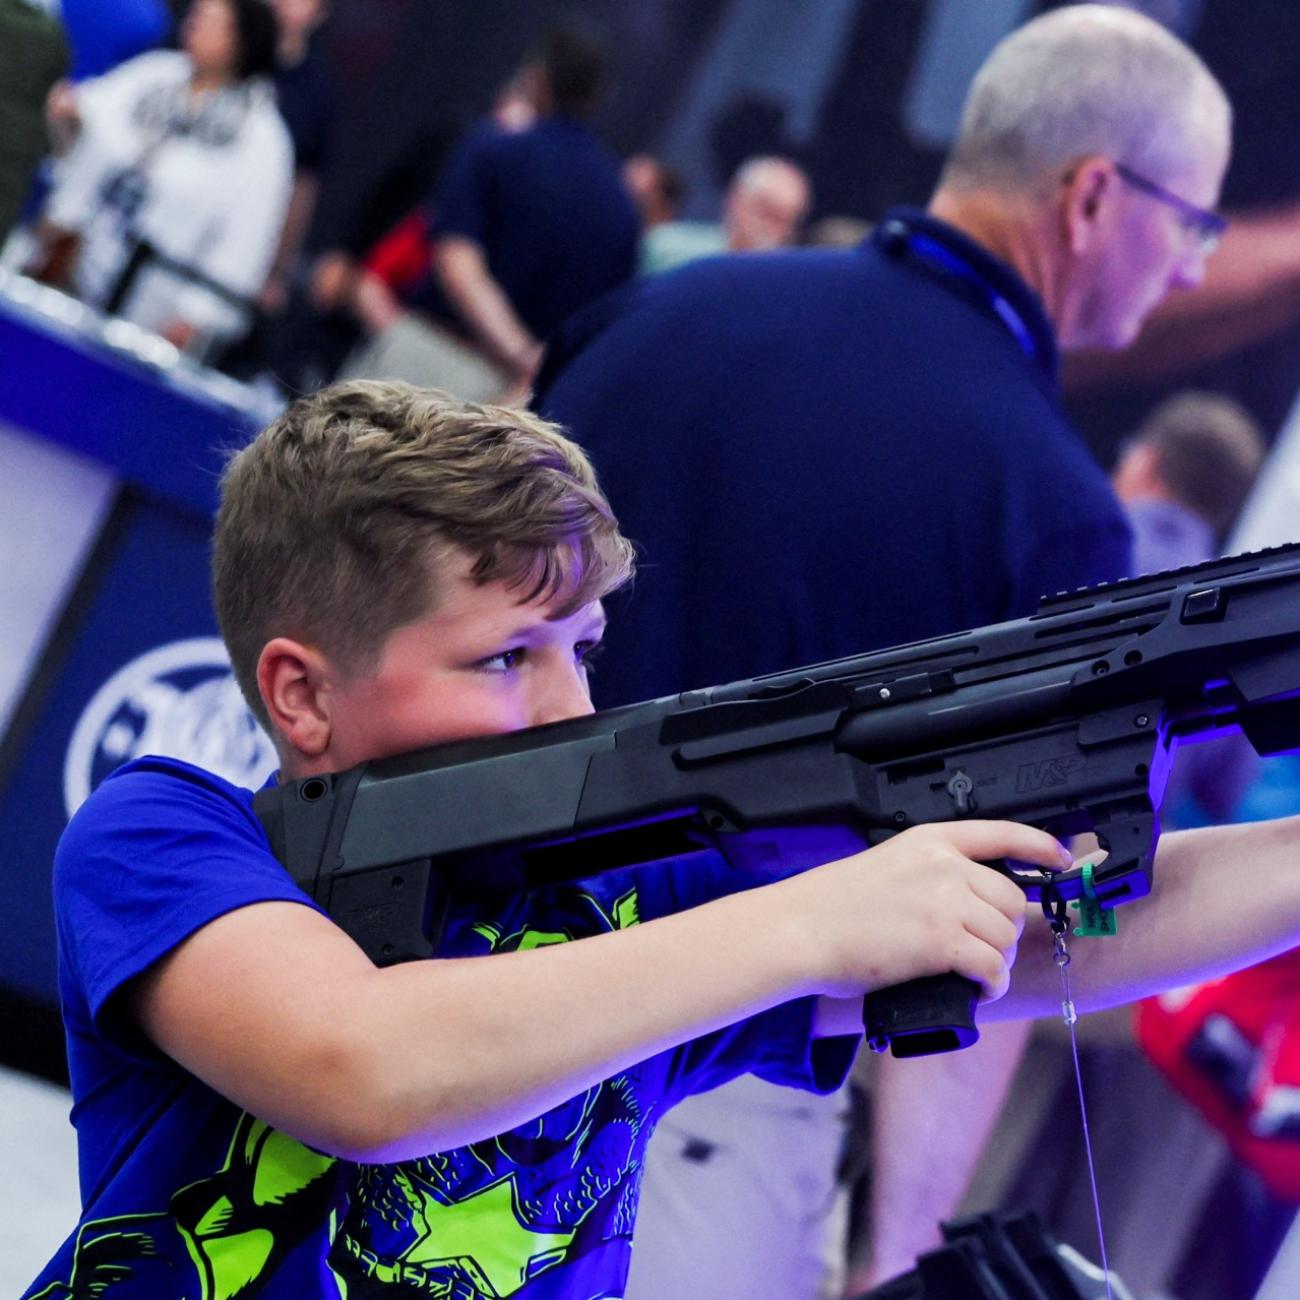 A boy tries out a 12 gauge Smith and Wesson shotgun as people attend the National Rifle Association (NRA) annual convention, in Houston, Texas, on May 28, 2022.